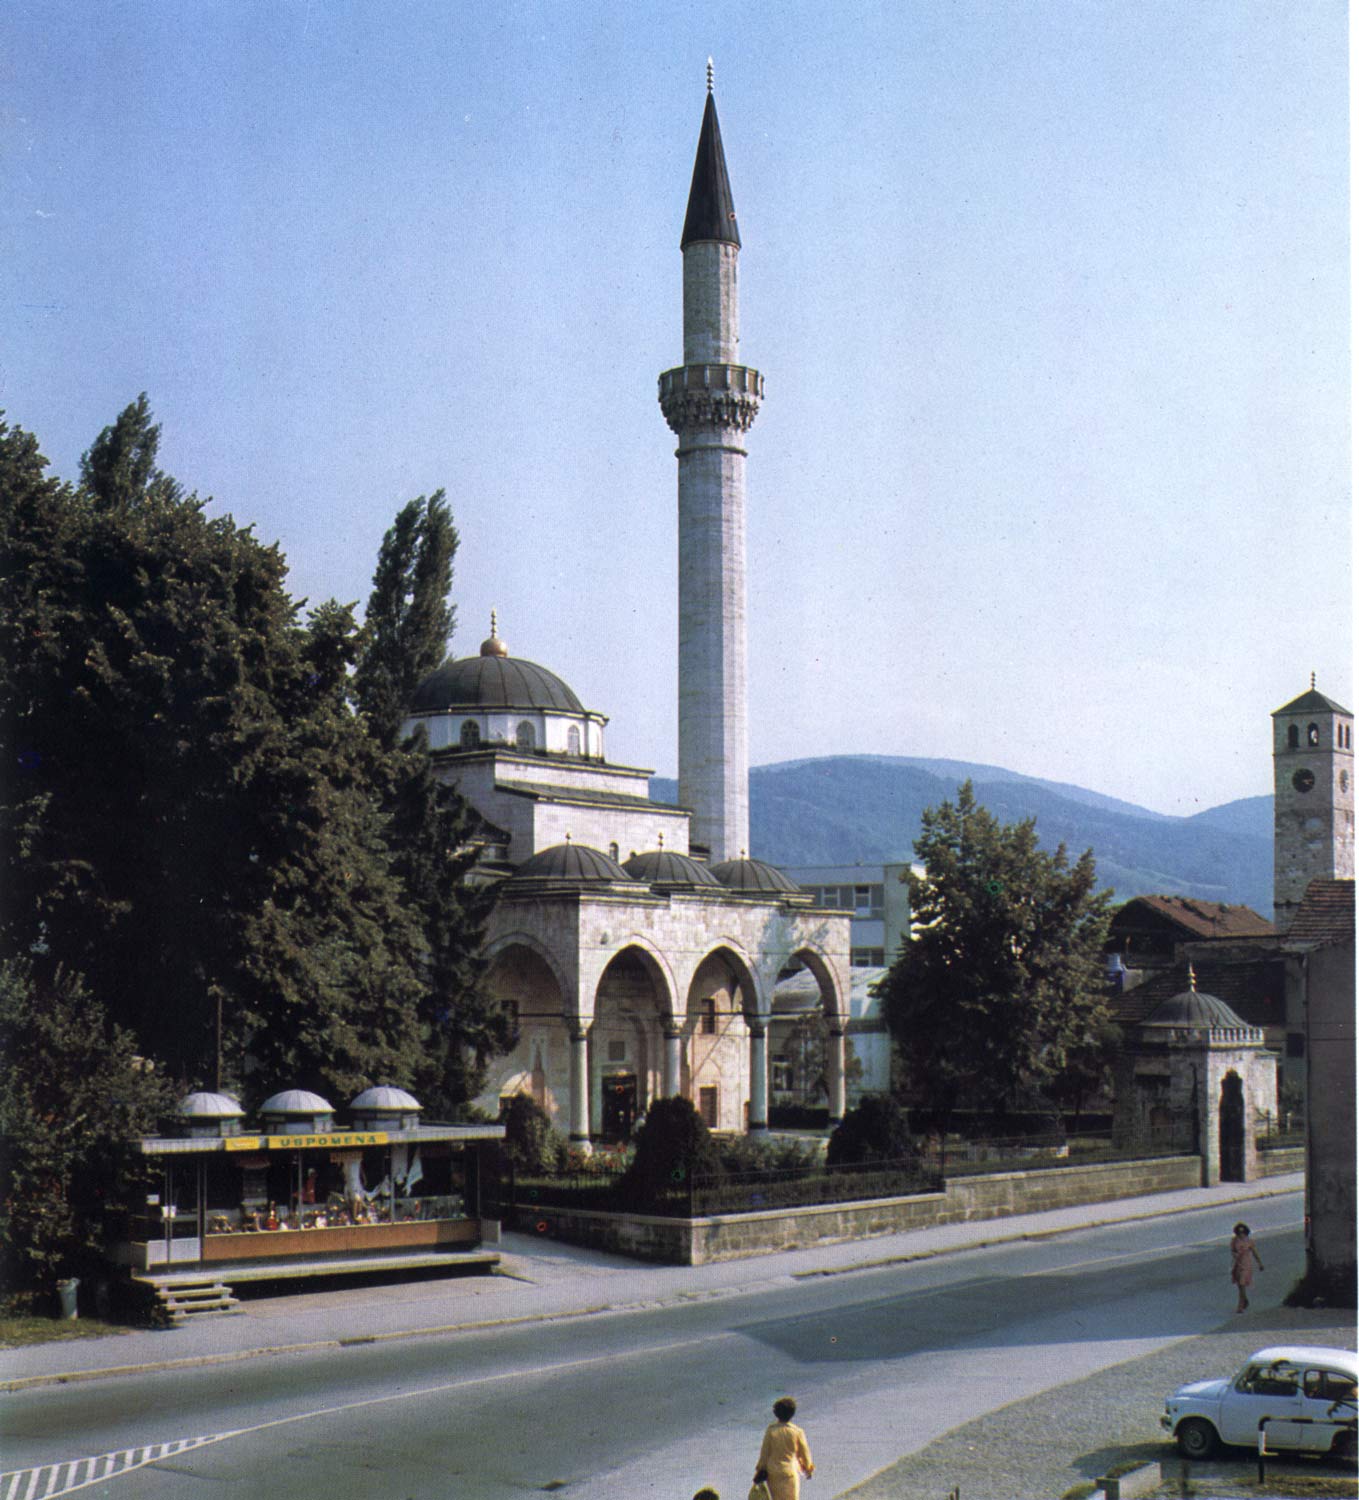 View from the north. At right is the entrance gate to the complex, the mausoleum (turbe) of Ferhad Pasha’s standard-bearer (bayraktar), and in the distance the clock tower (sahat kula) of Ferhad Pasha Sokolović.